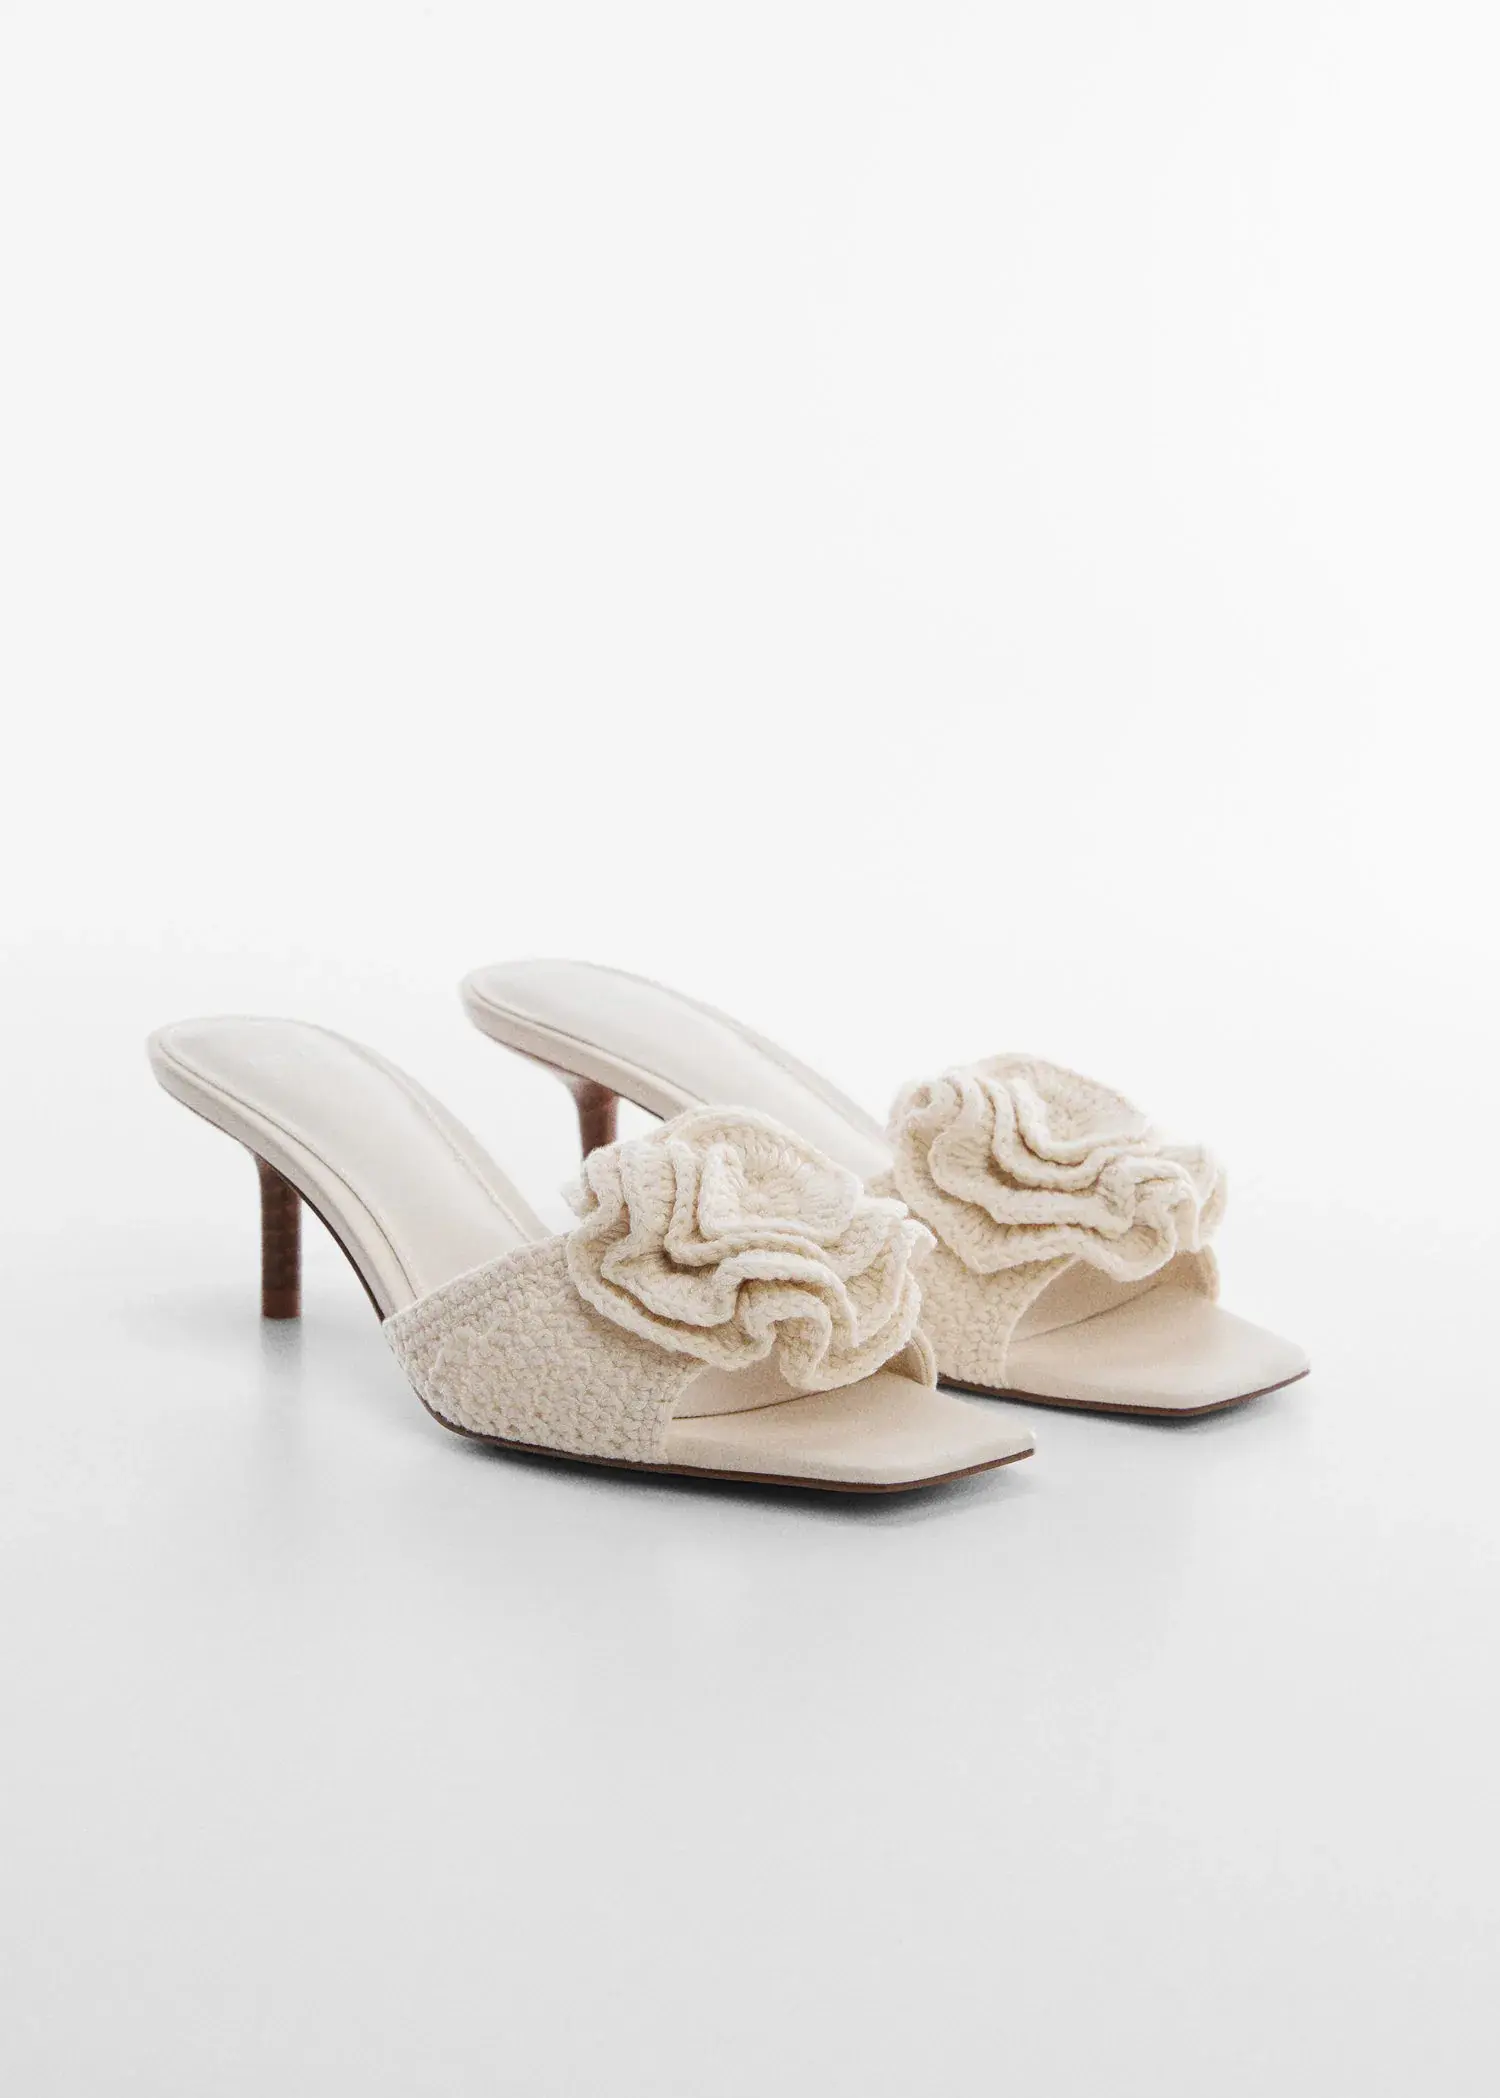 Mango Crochet flower sandal. a pair of white high heeled shoes on a white surface. 